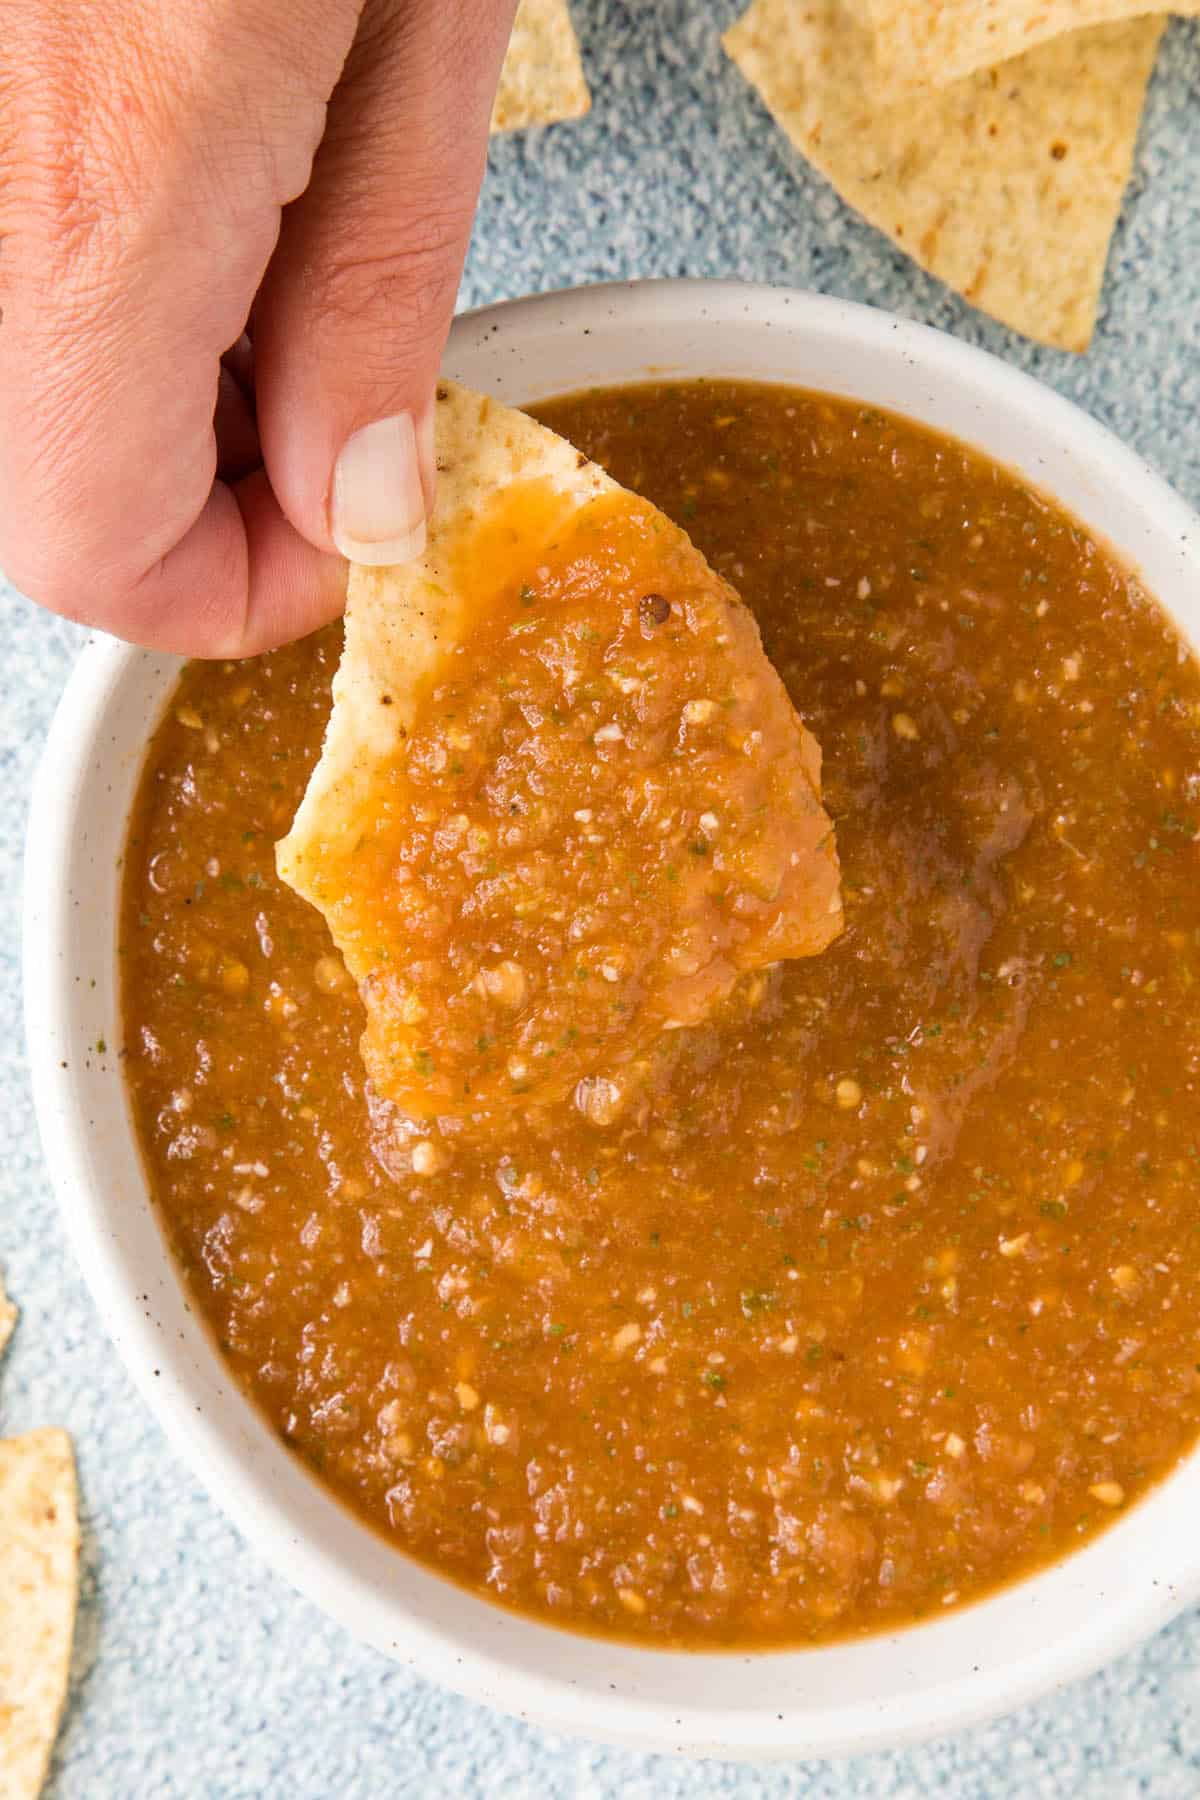 Salsa Ranchera on a chip, ready to eat